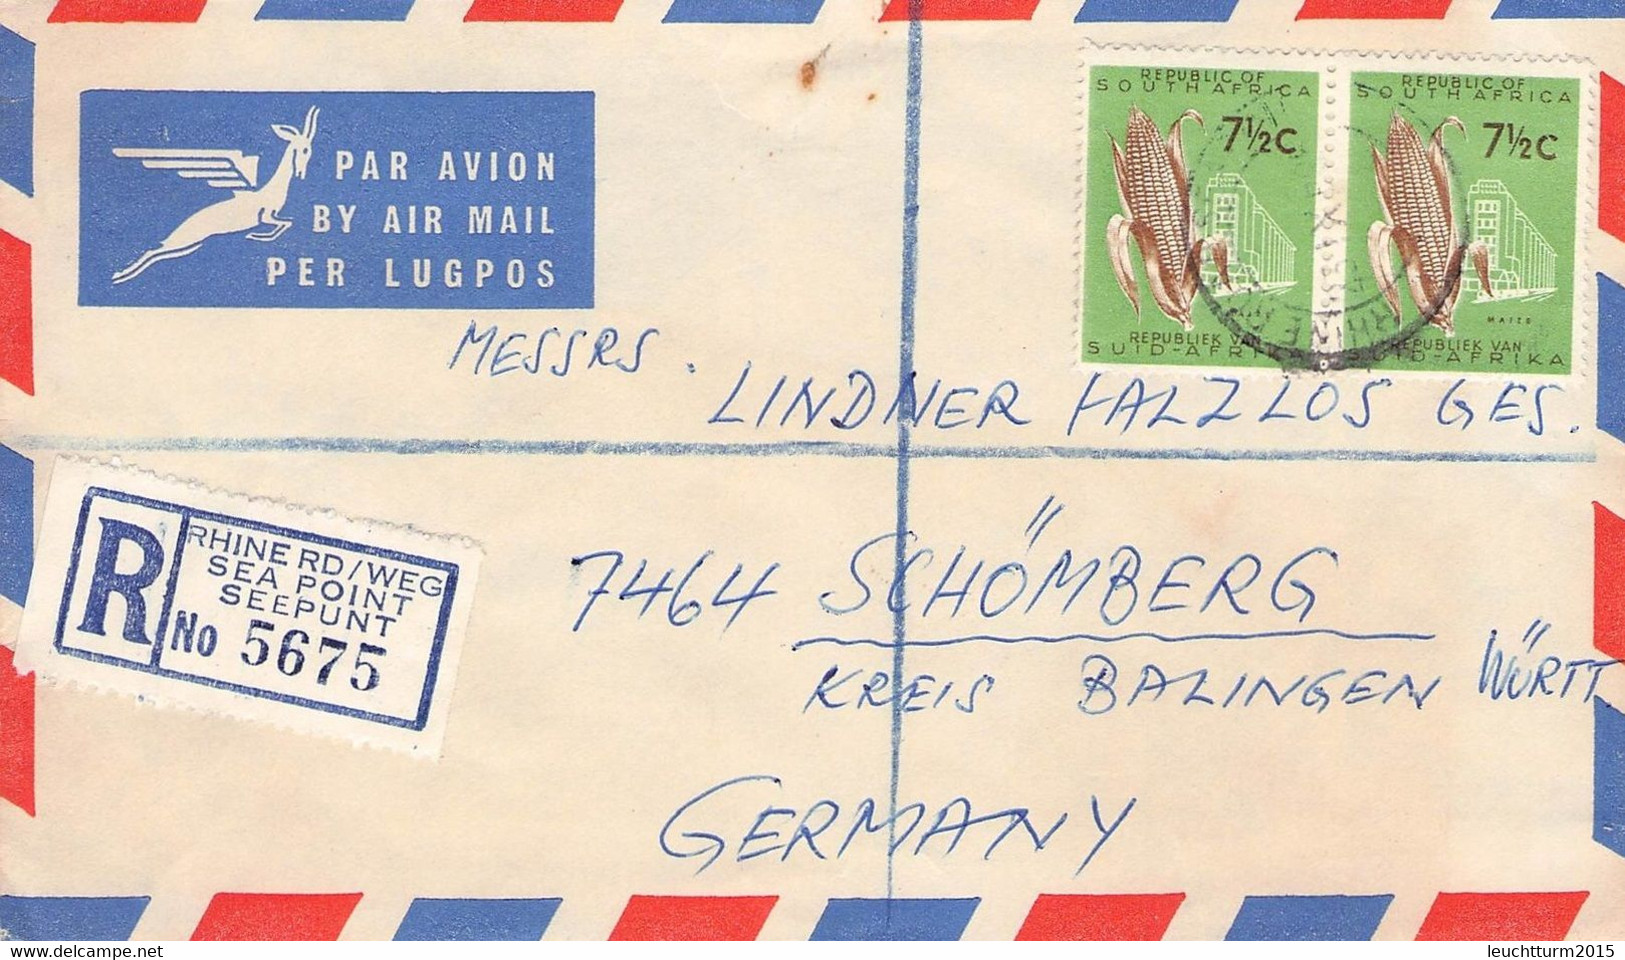 SOUTH AFRICA - AIR MAIL/RECO 1965 SEA POINT - SCHÖMBERG/GERMANY 1965I /ak1017 - Lettres & Documents